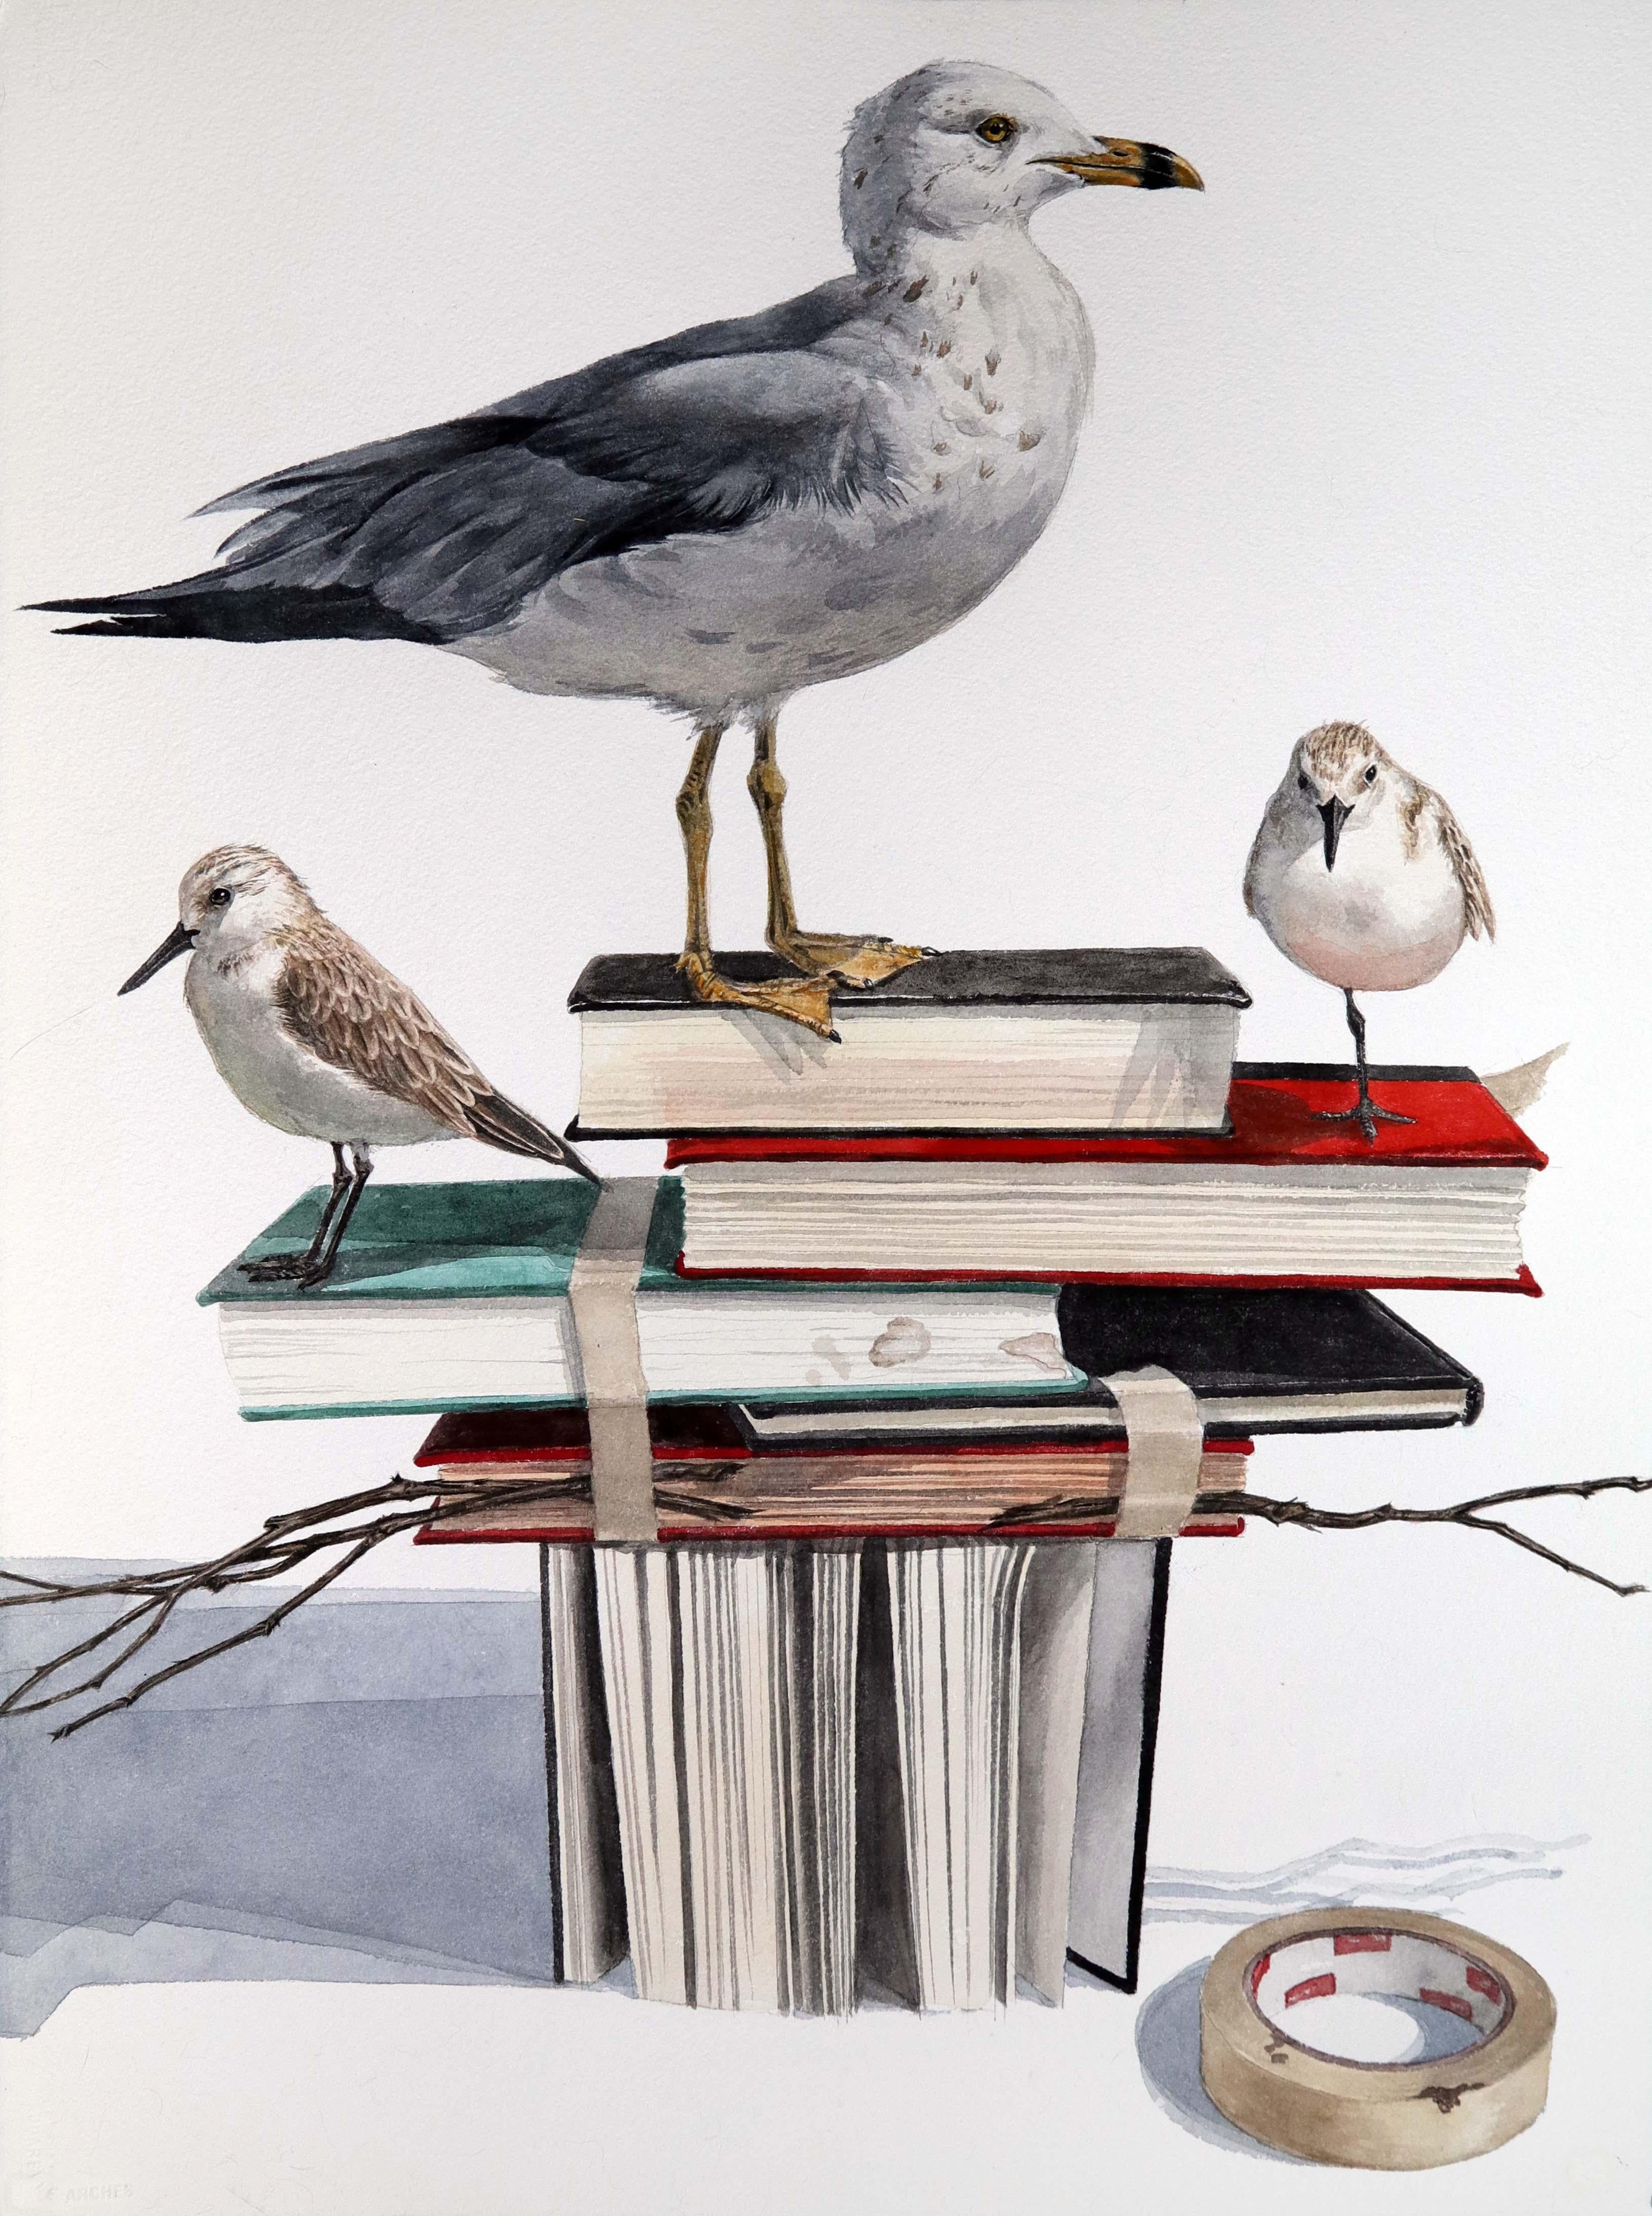 Thomas Broadbent Animal Art - "Shore House" watercolor on paper, 30"x22", signed on reverse